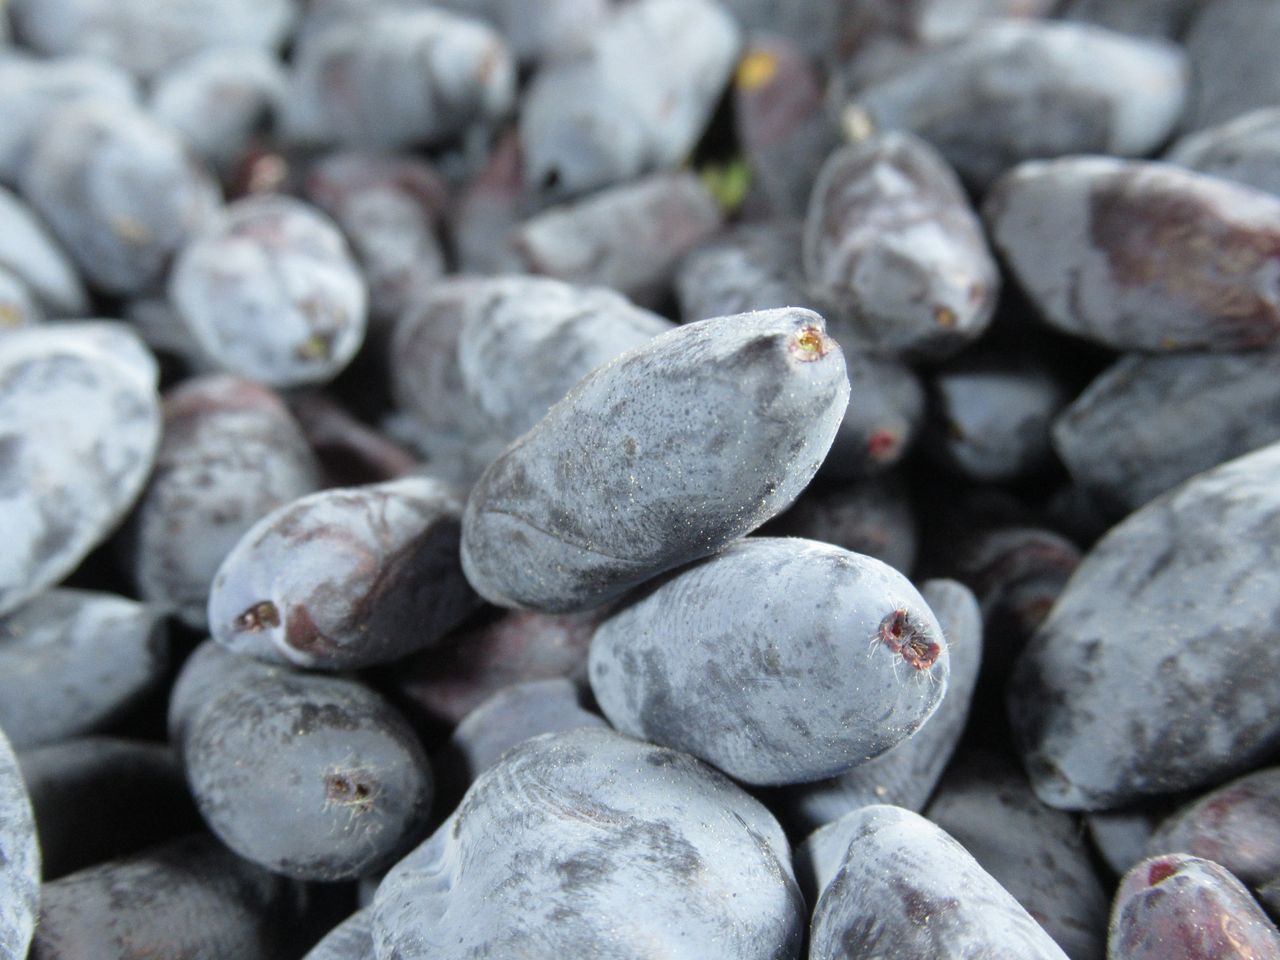 Honeyberries: The underrated superfruit making waves in health circles